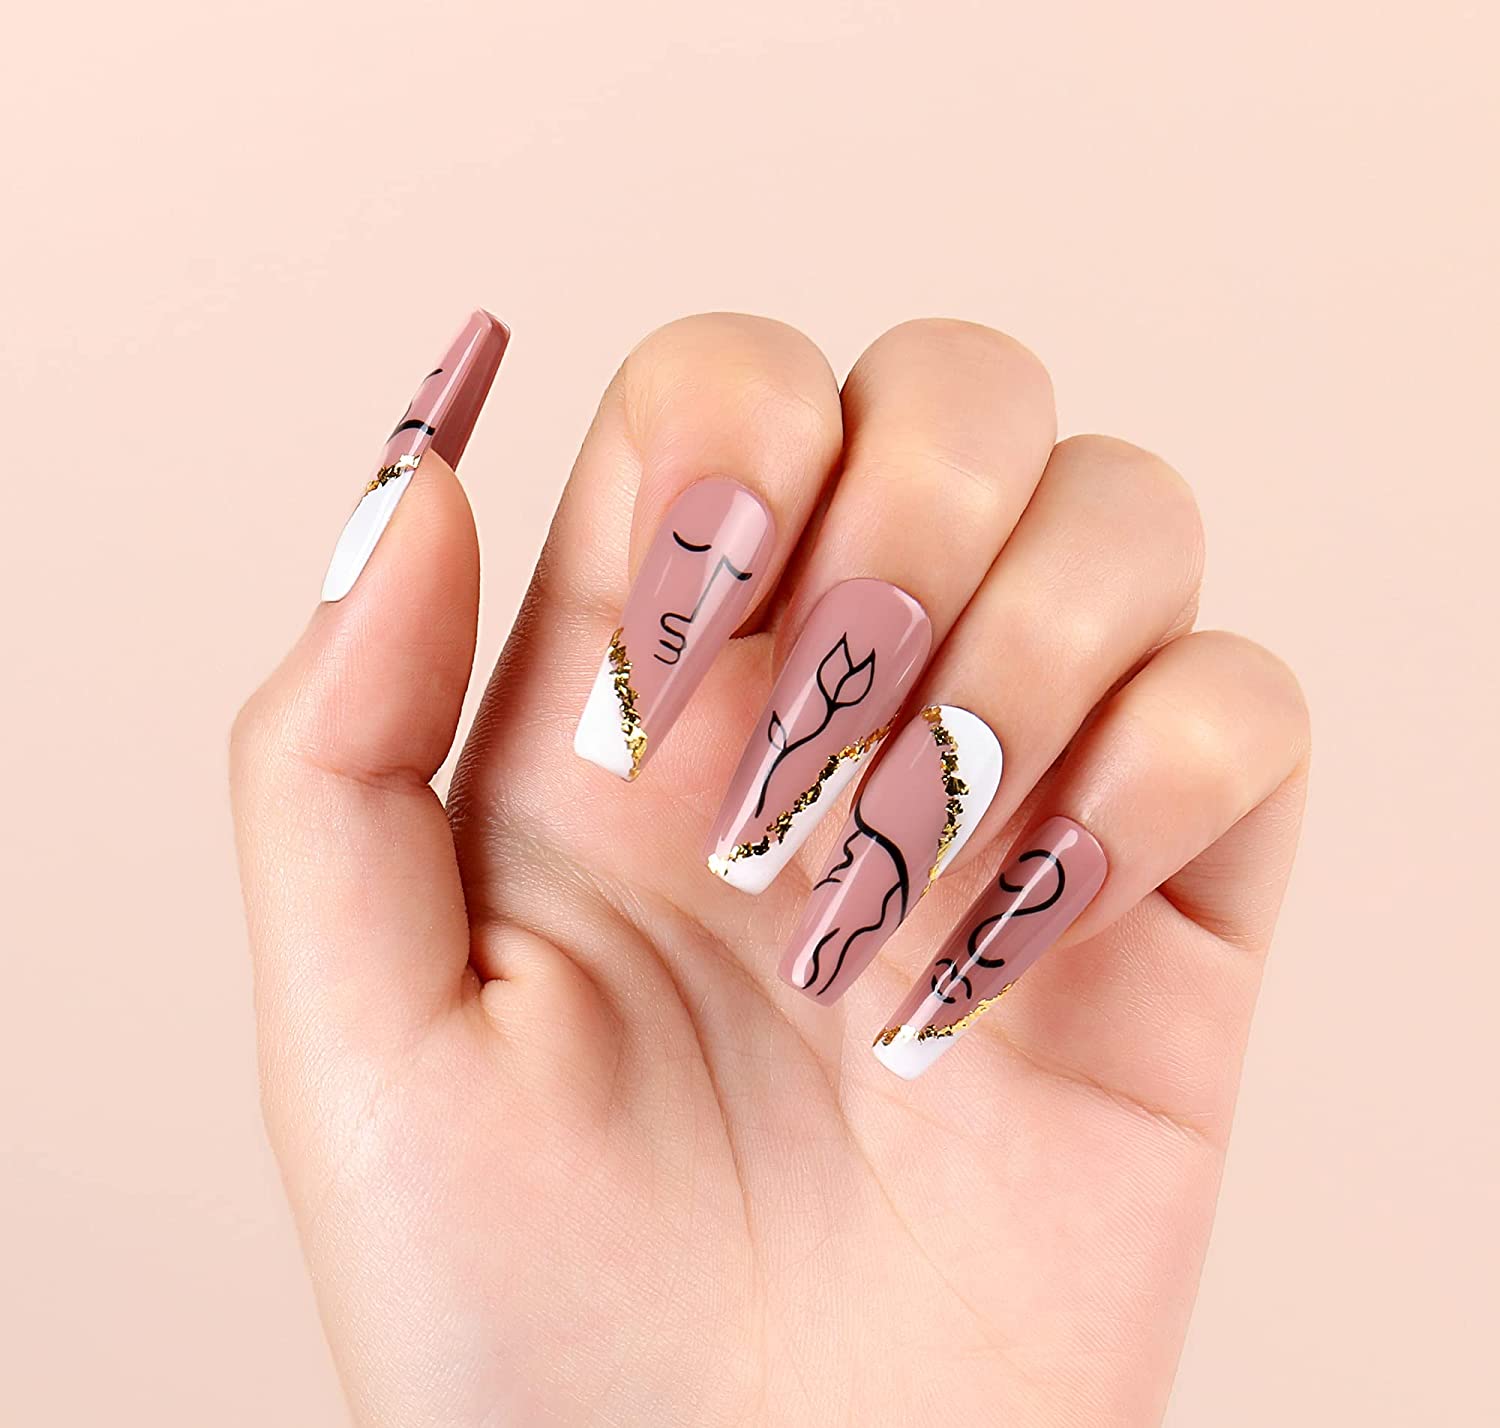 Summer Nail Designs You'll Probably Want To Wear : Shades of pink nails